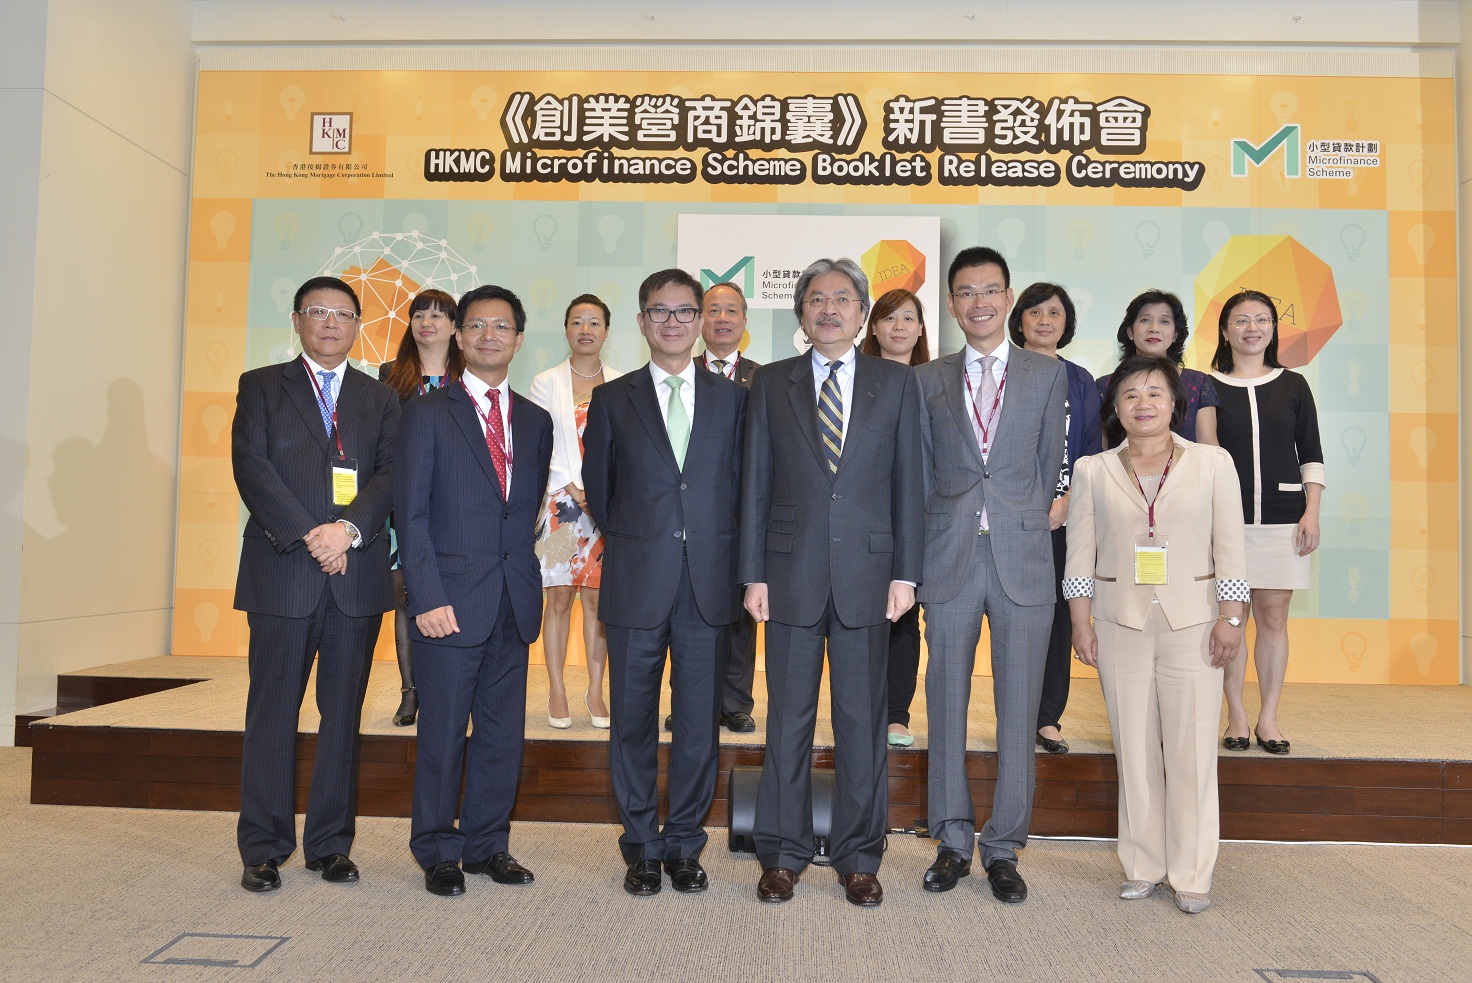 The Chairman of the HKMC and Financial Secretary Mr John Tsang Chun-wah (third from right in the first row), today officiates at the Microfinance Scheme Booklet release ceremony.  The ceremony is also attended by representatives of the Scheme’s participating banks and NGOs.